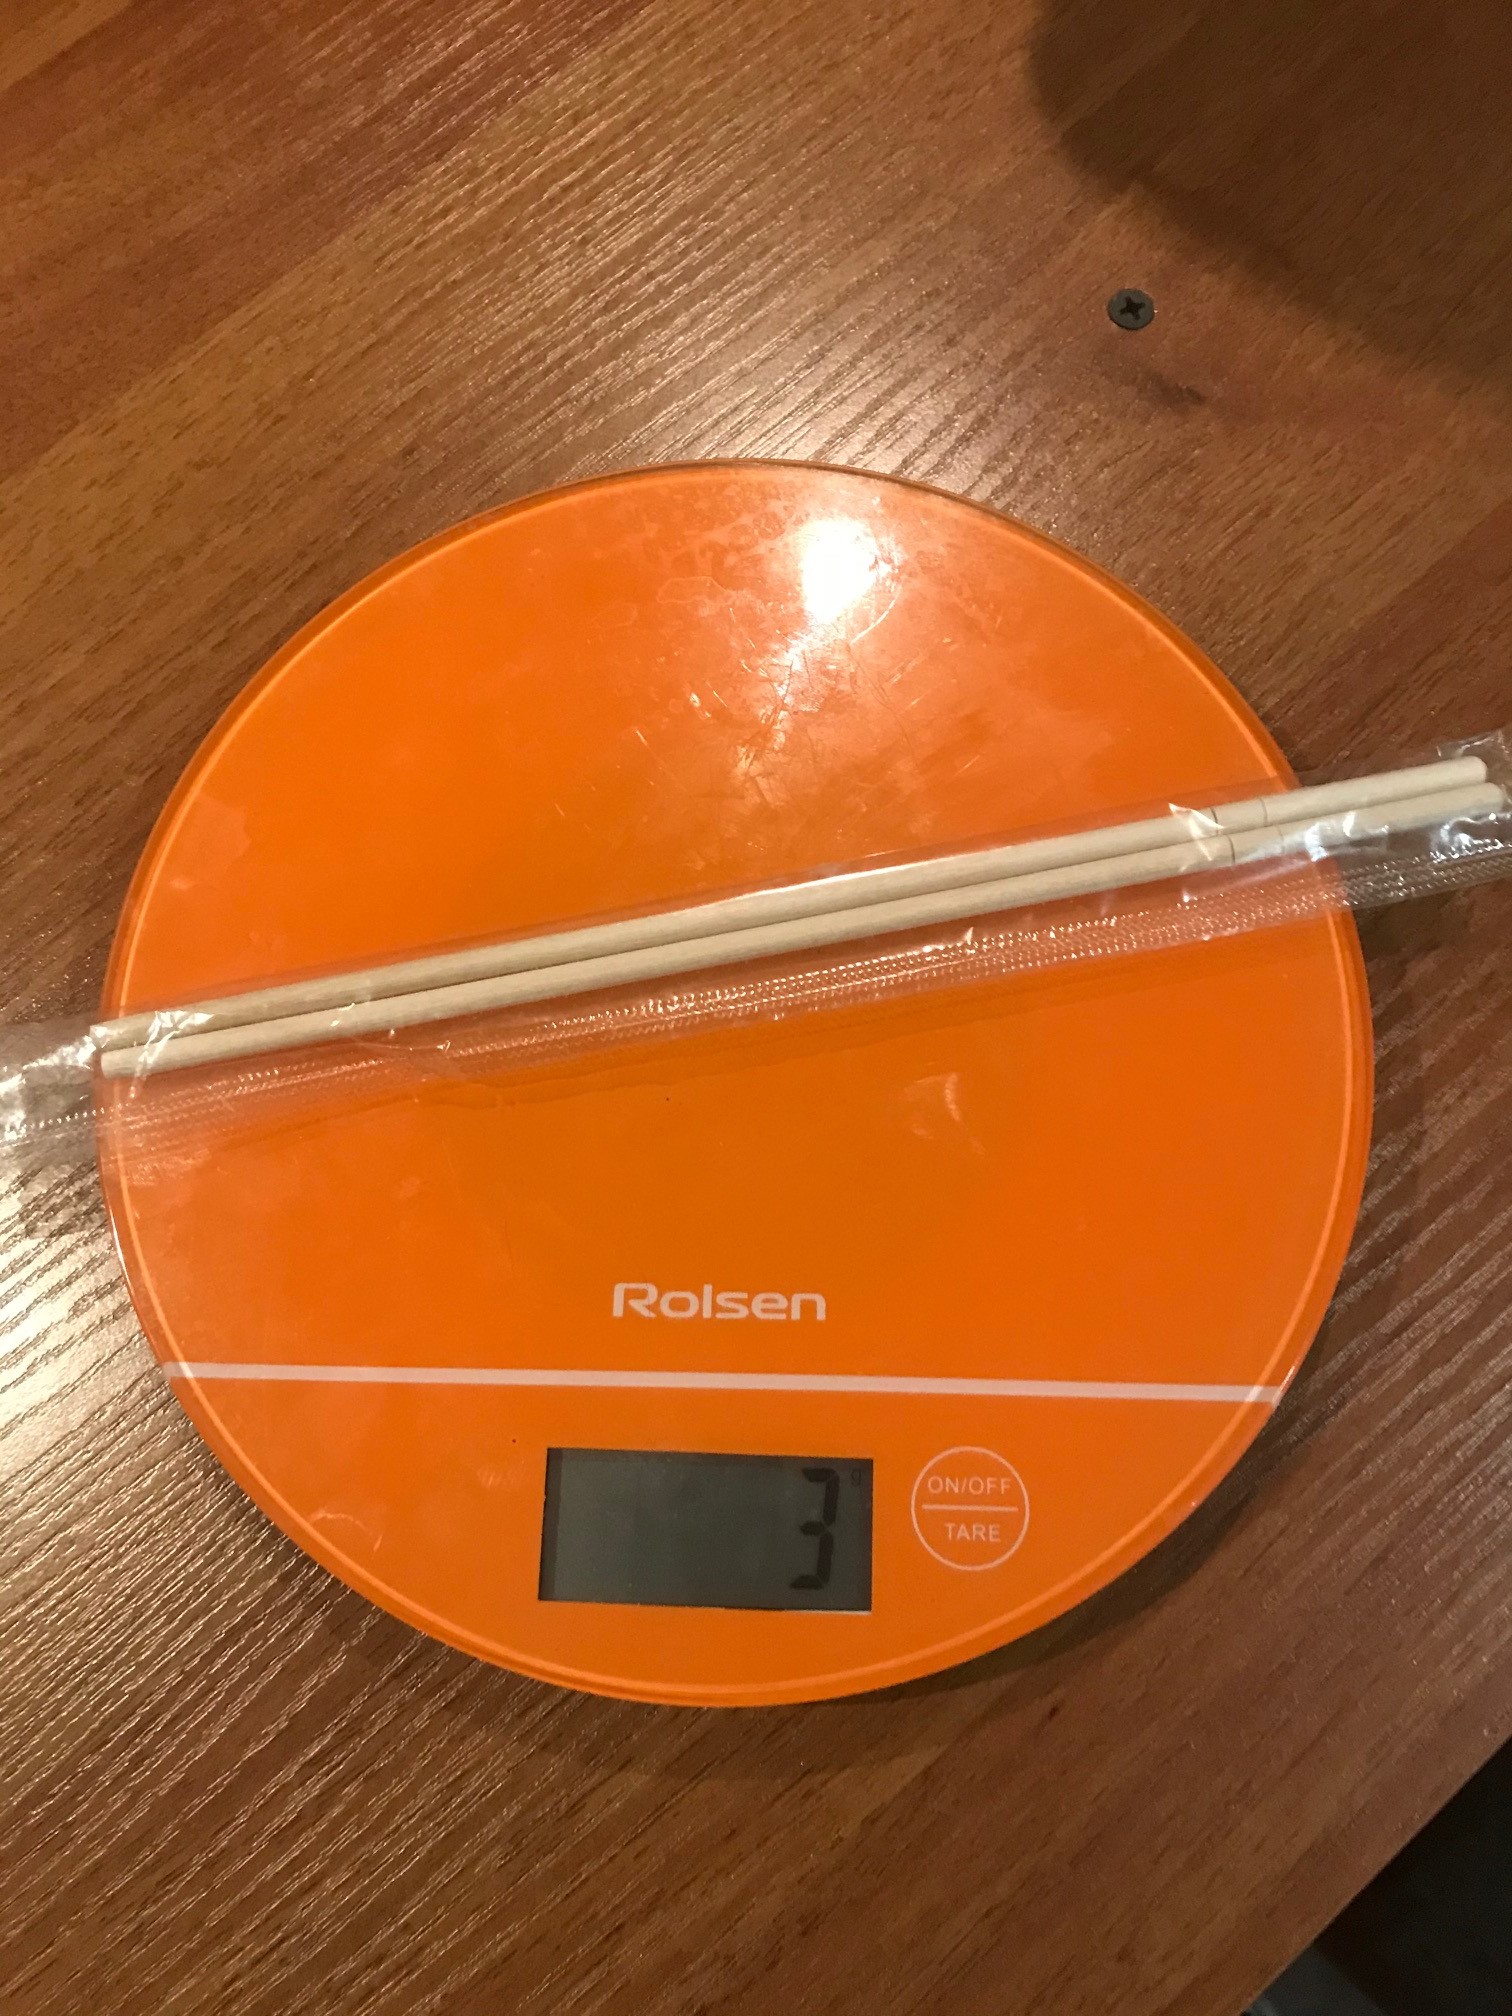 the weight of the sushi sticks